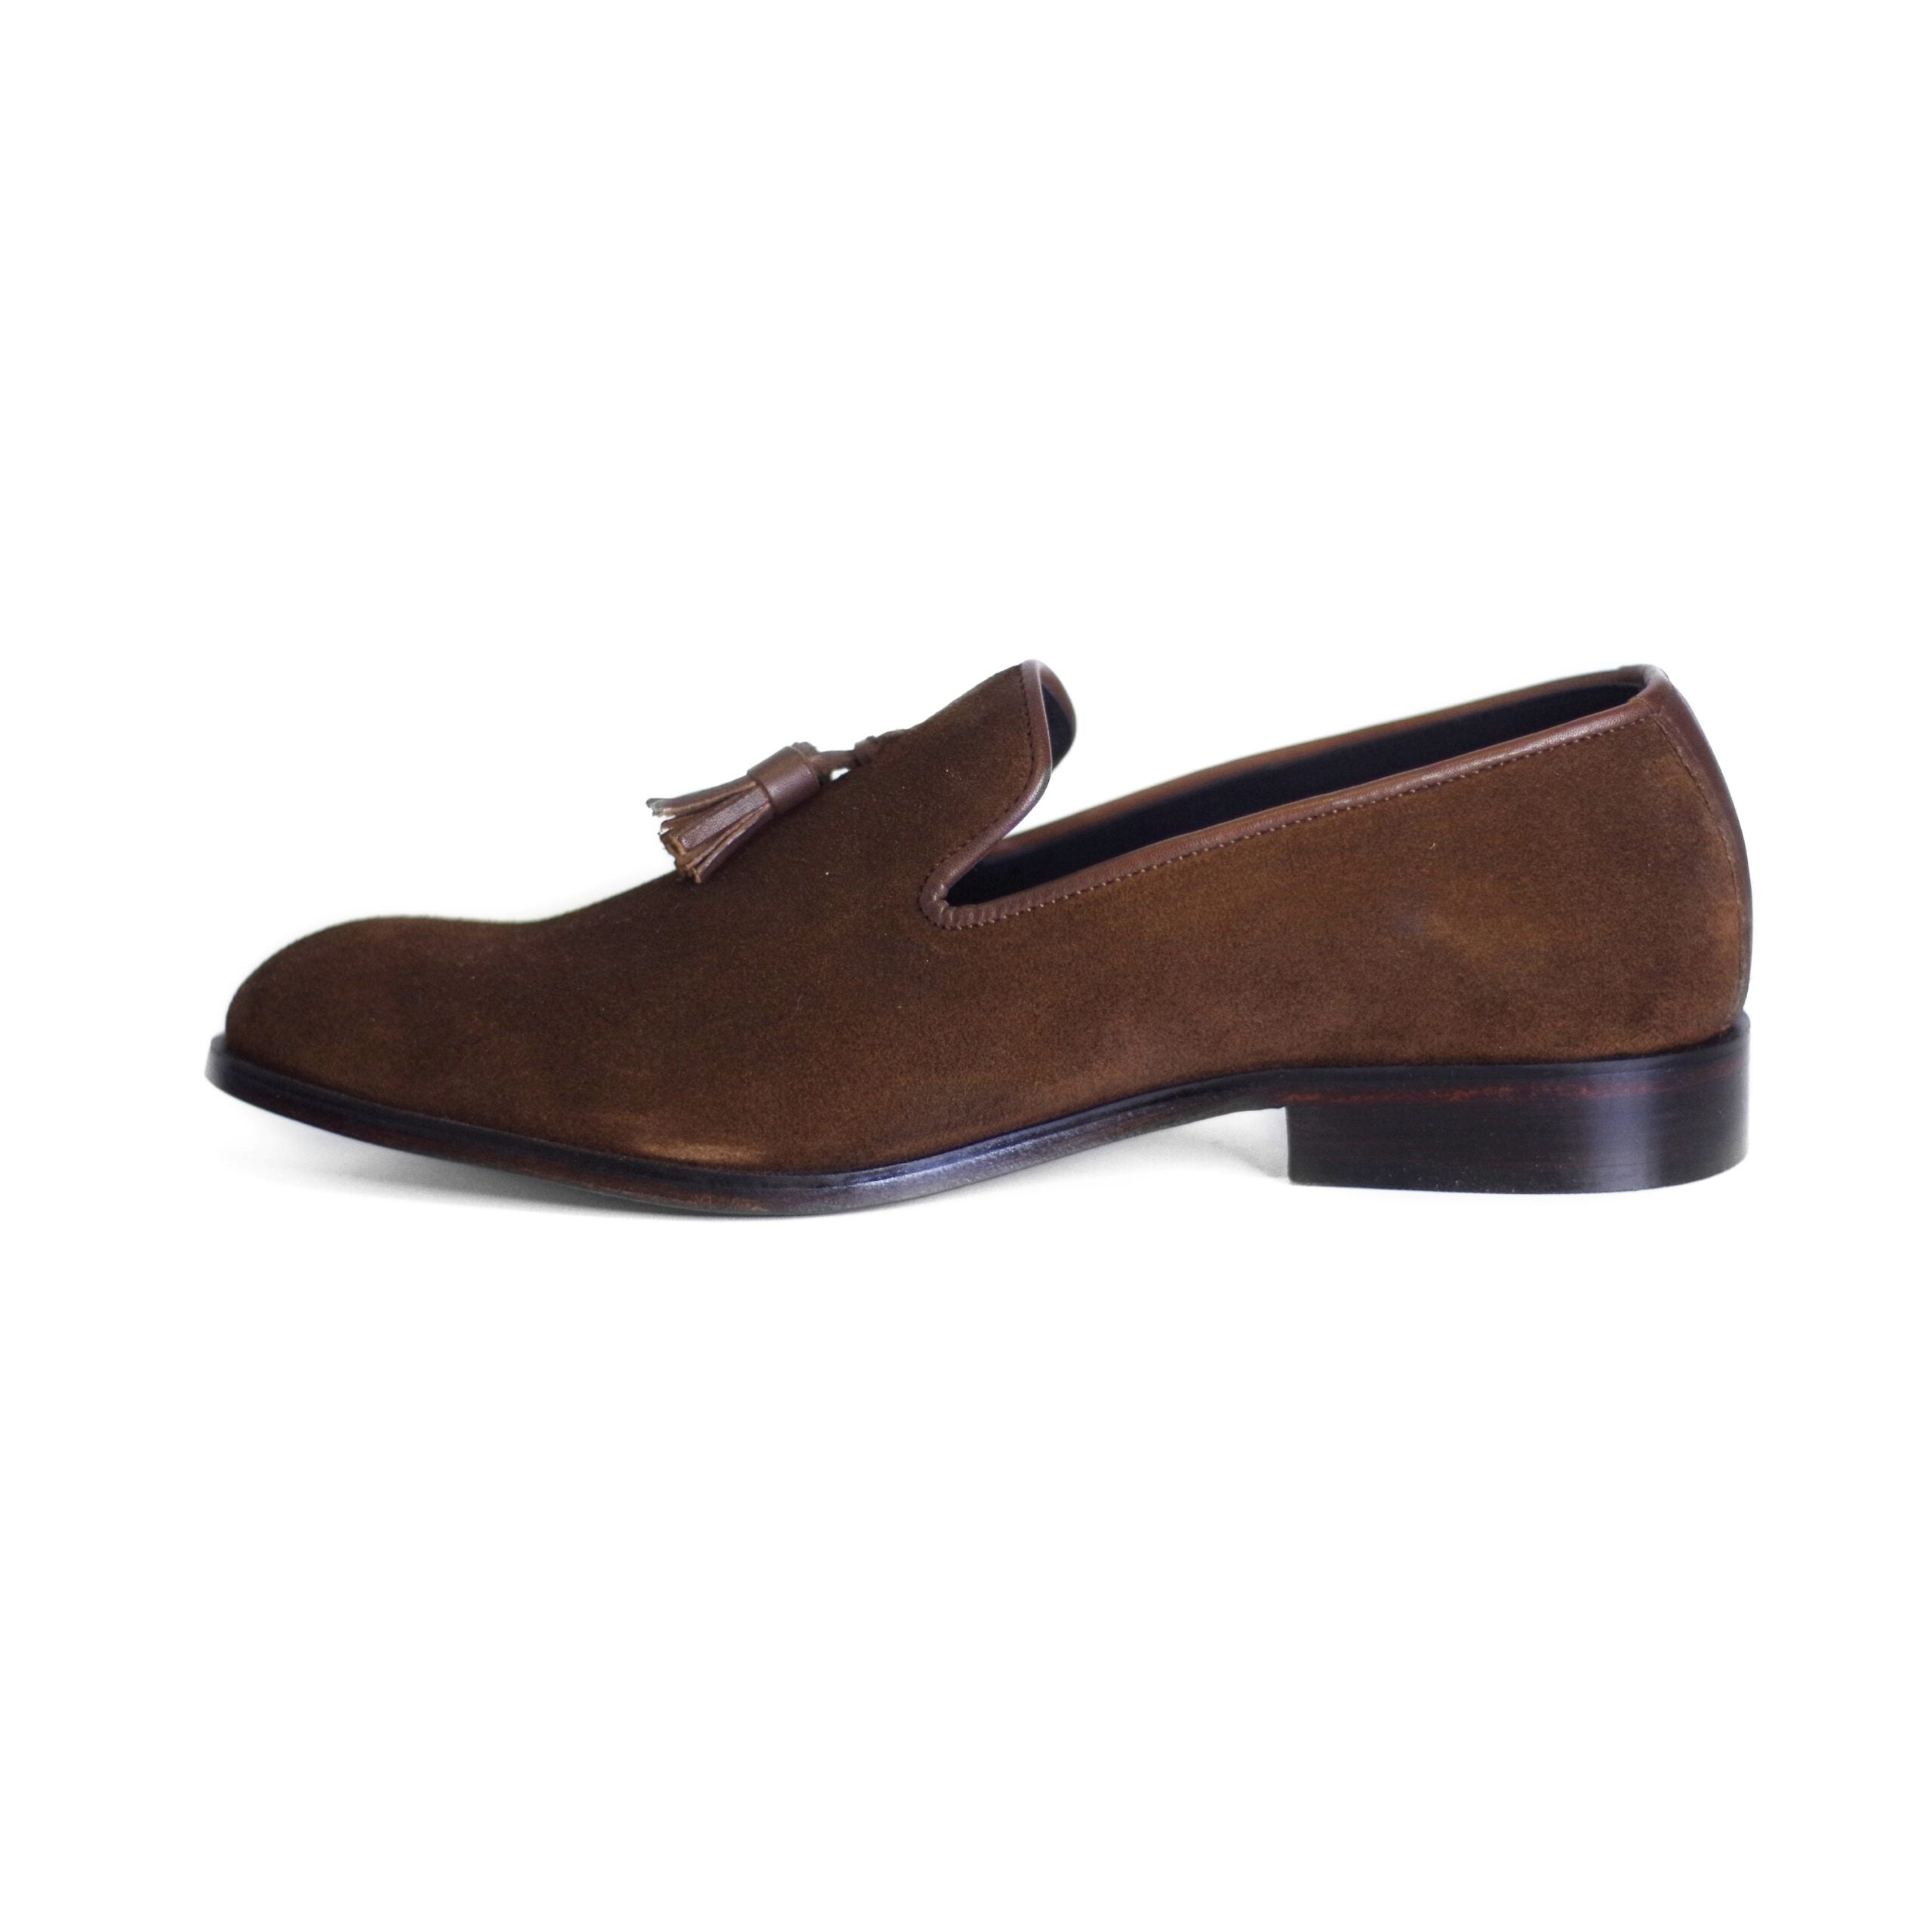 Brown With Tassels & Luxurious Suede Hand-Crafted Philosopher Shoes/Loafers For Men